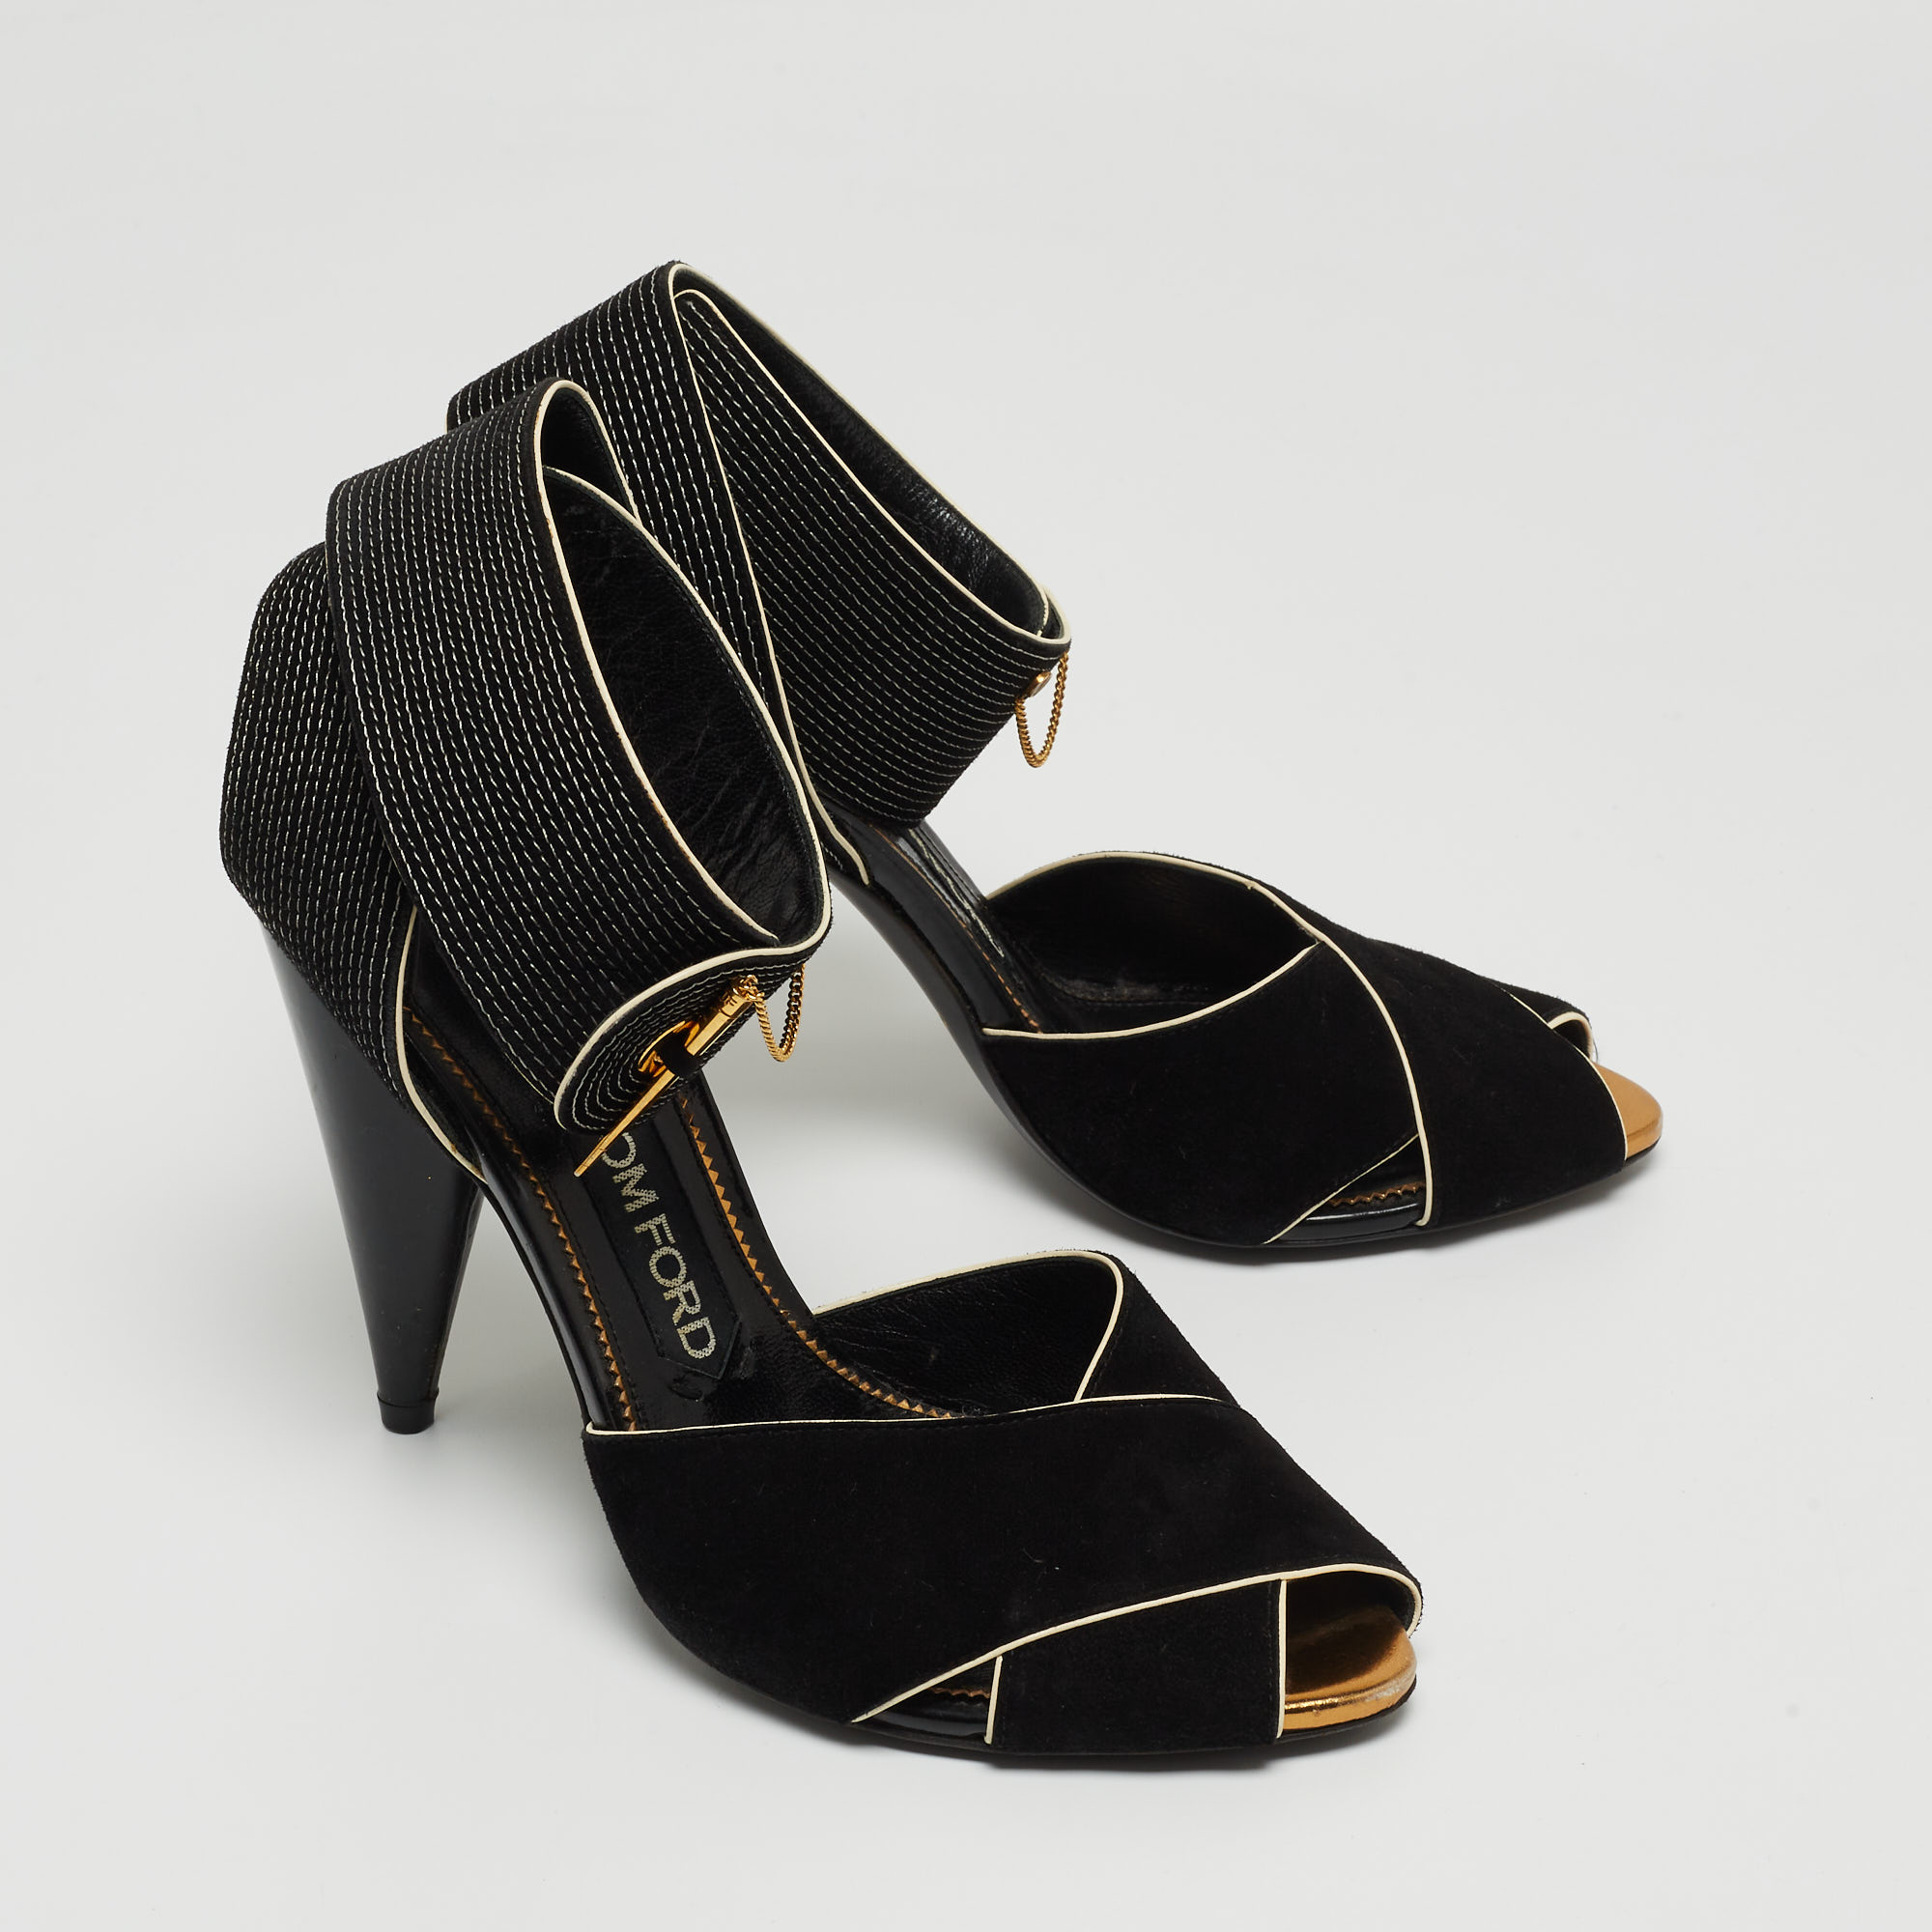 Tom Ford Black Suede Ankle Wrap Crisscross Sandals Size 37